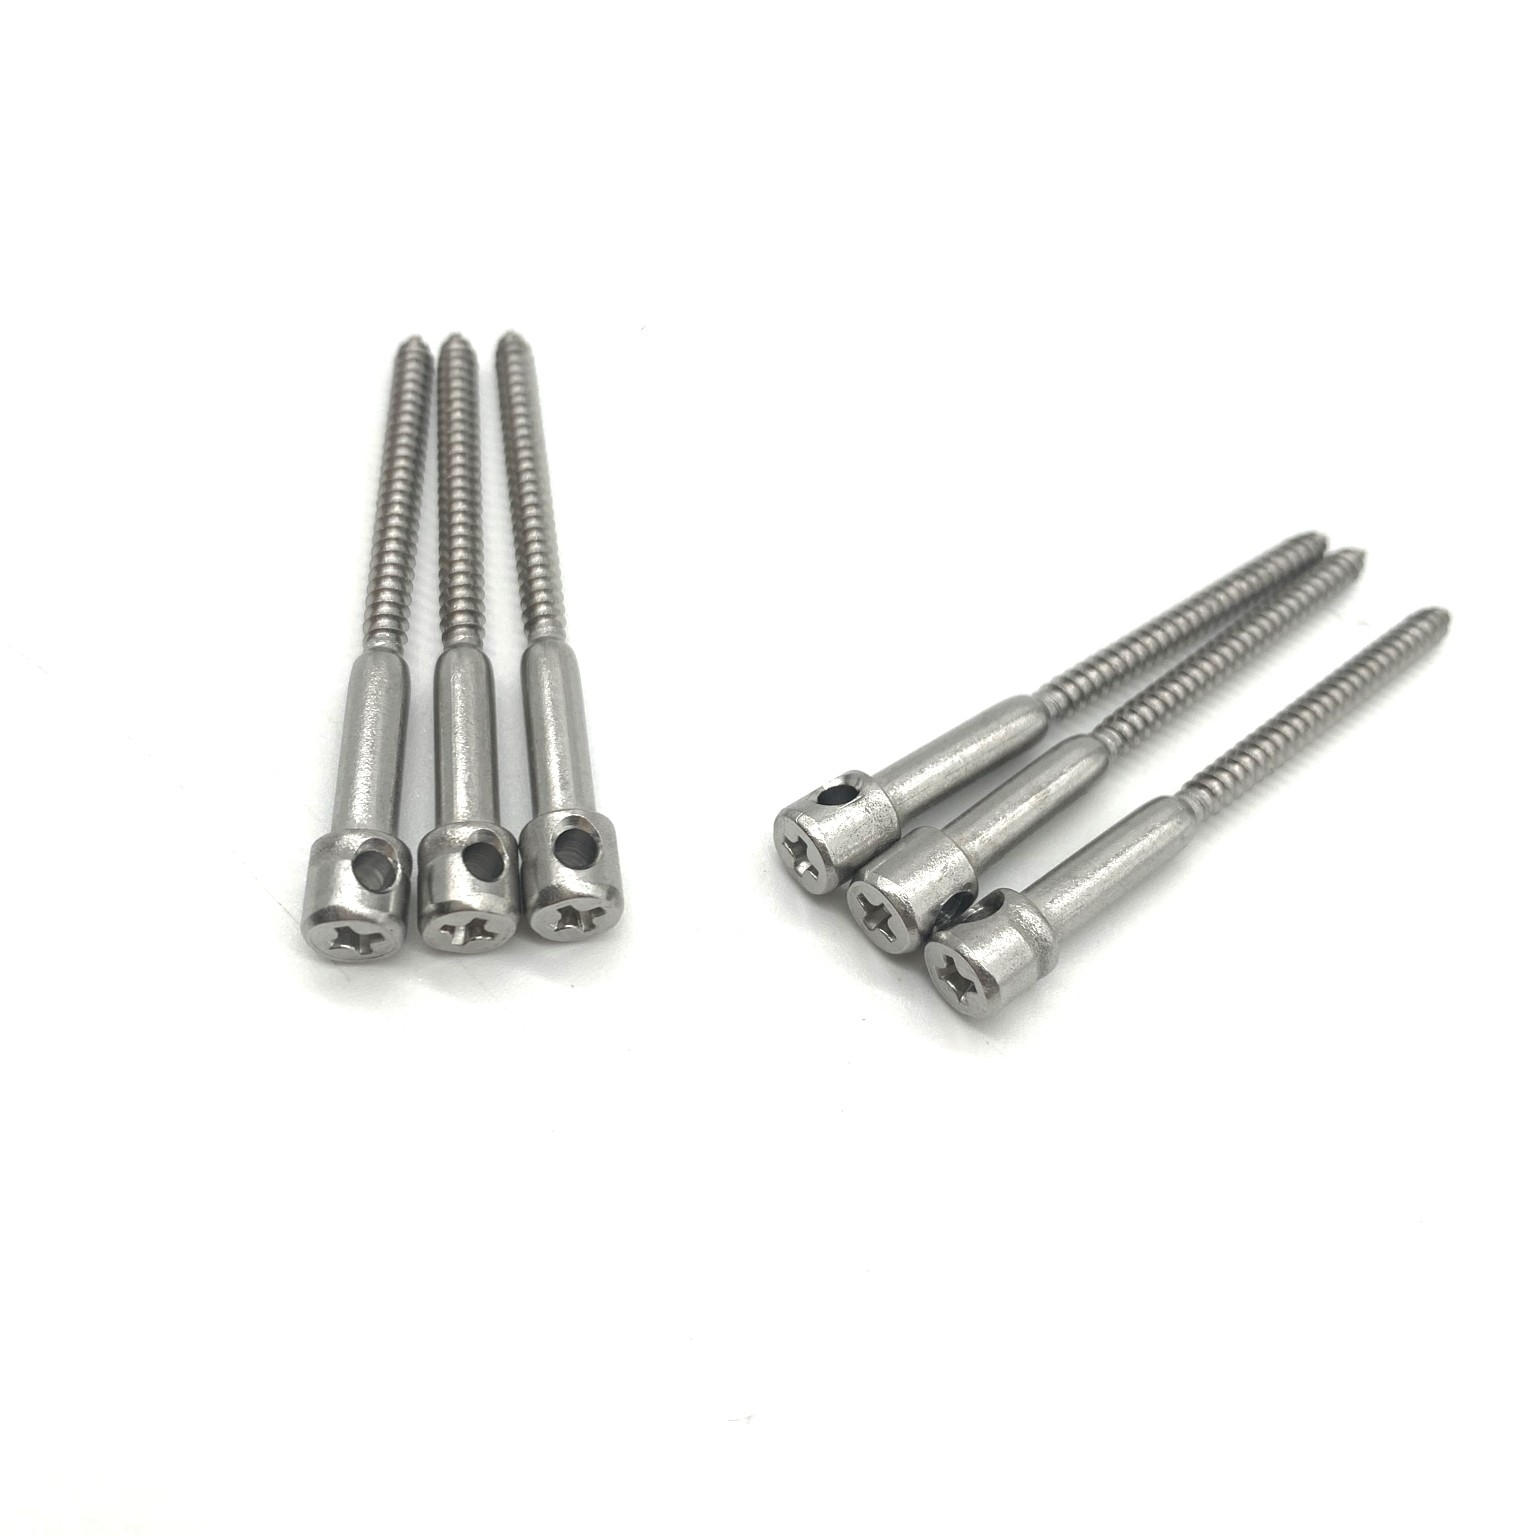 M3*30 Stainless Steel Self Tapping Seal Screw Cross Single Hole Electric Meter Tapping Screw 